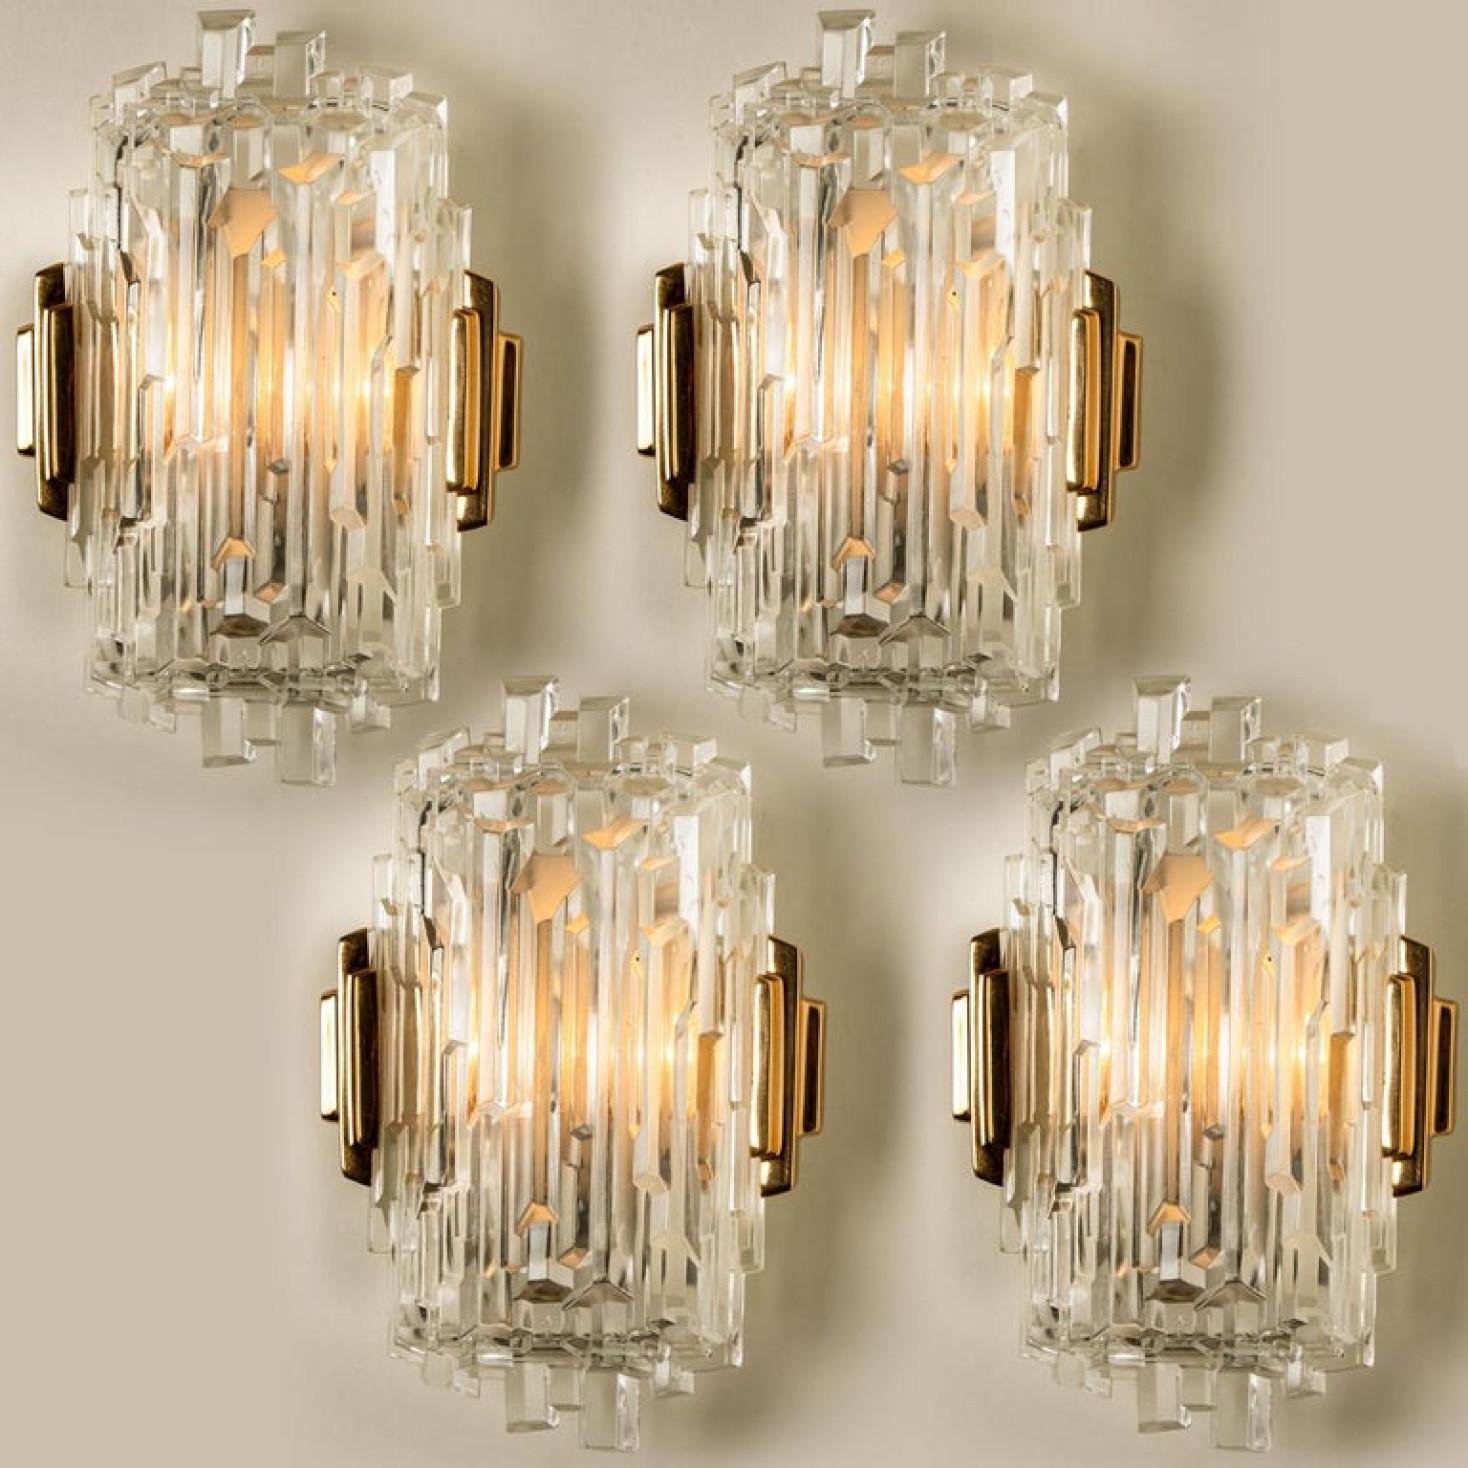 Pair of of Icicle Glass Wall Sconces /Lights, 1960s For Sale 1